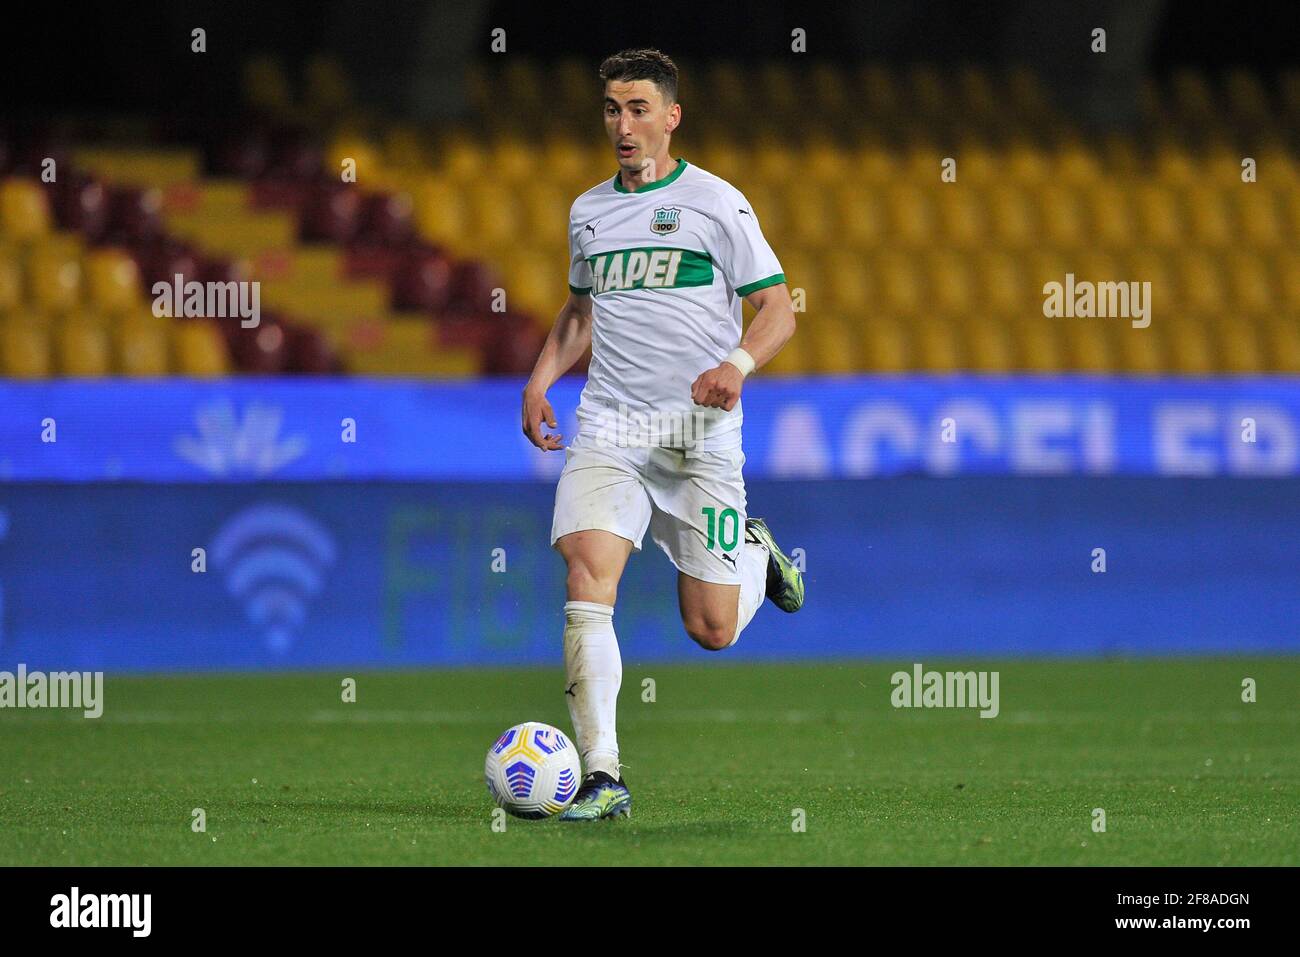 Benevento, Italy. 12th Apr, 2021. Filip Djuricic player of Sassuolo, during the match of the Italian football league Serie A between Benevento vs Sassuolo final result 0-1, match played at the Ciro Vigorito stadium in Benevento. Italy, April 12, 2021. (Photo by Vincenzo Izzo/Sipa USA) Credit: Sipa USA/Alamy Live News Stock Photo